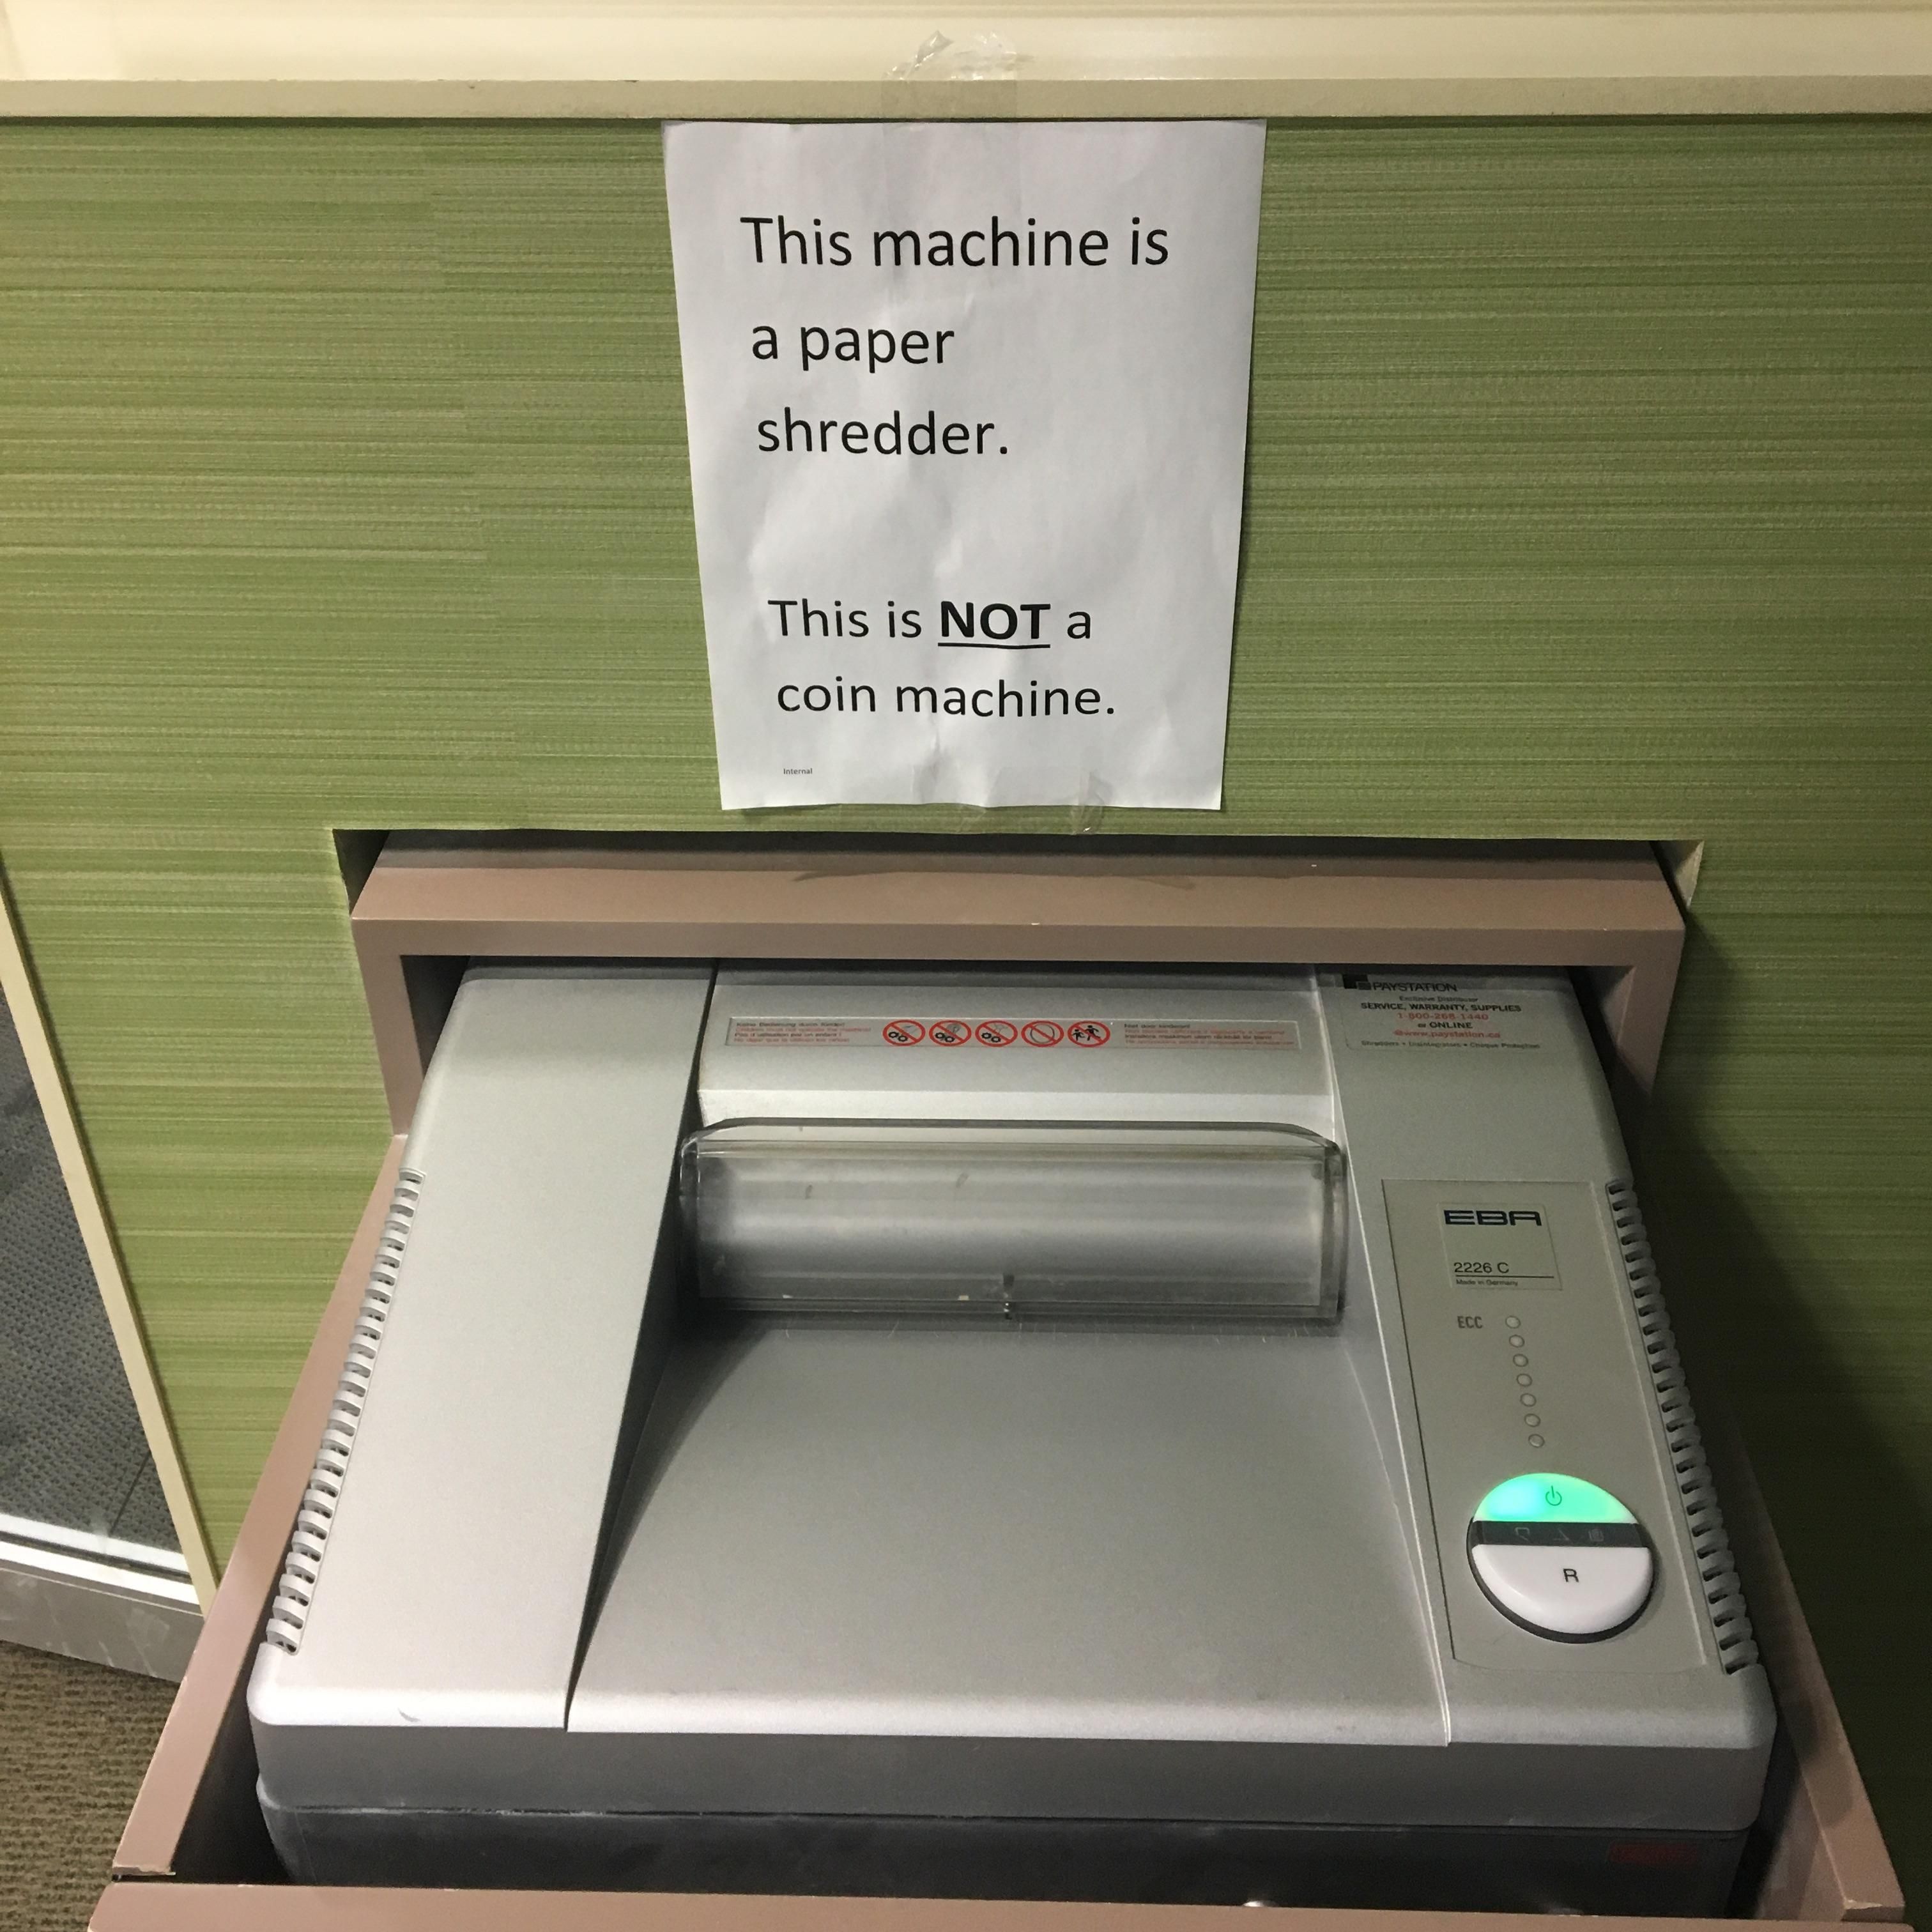 printer - This machine is a paper shredder. This is Not a coin machine.